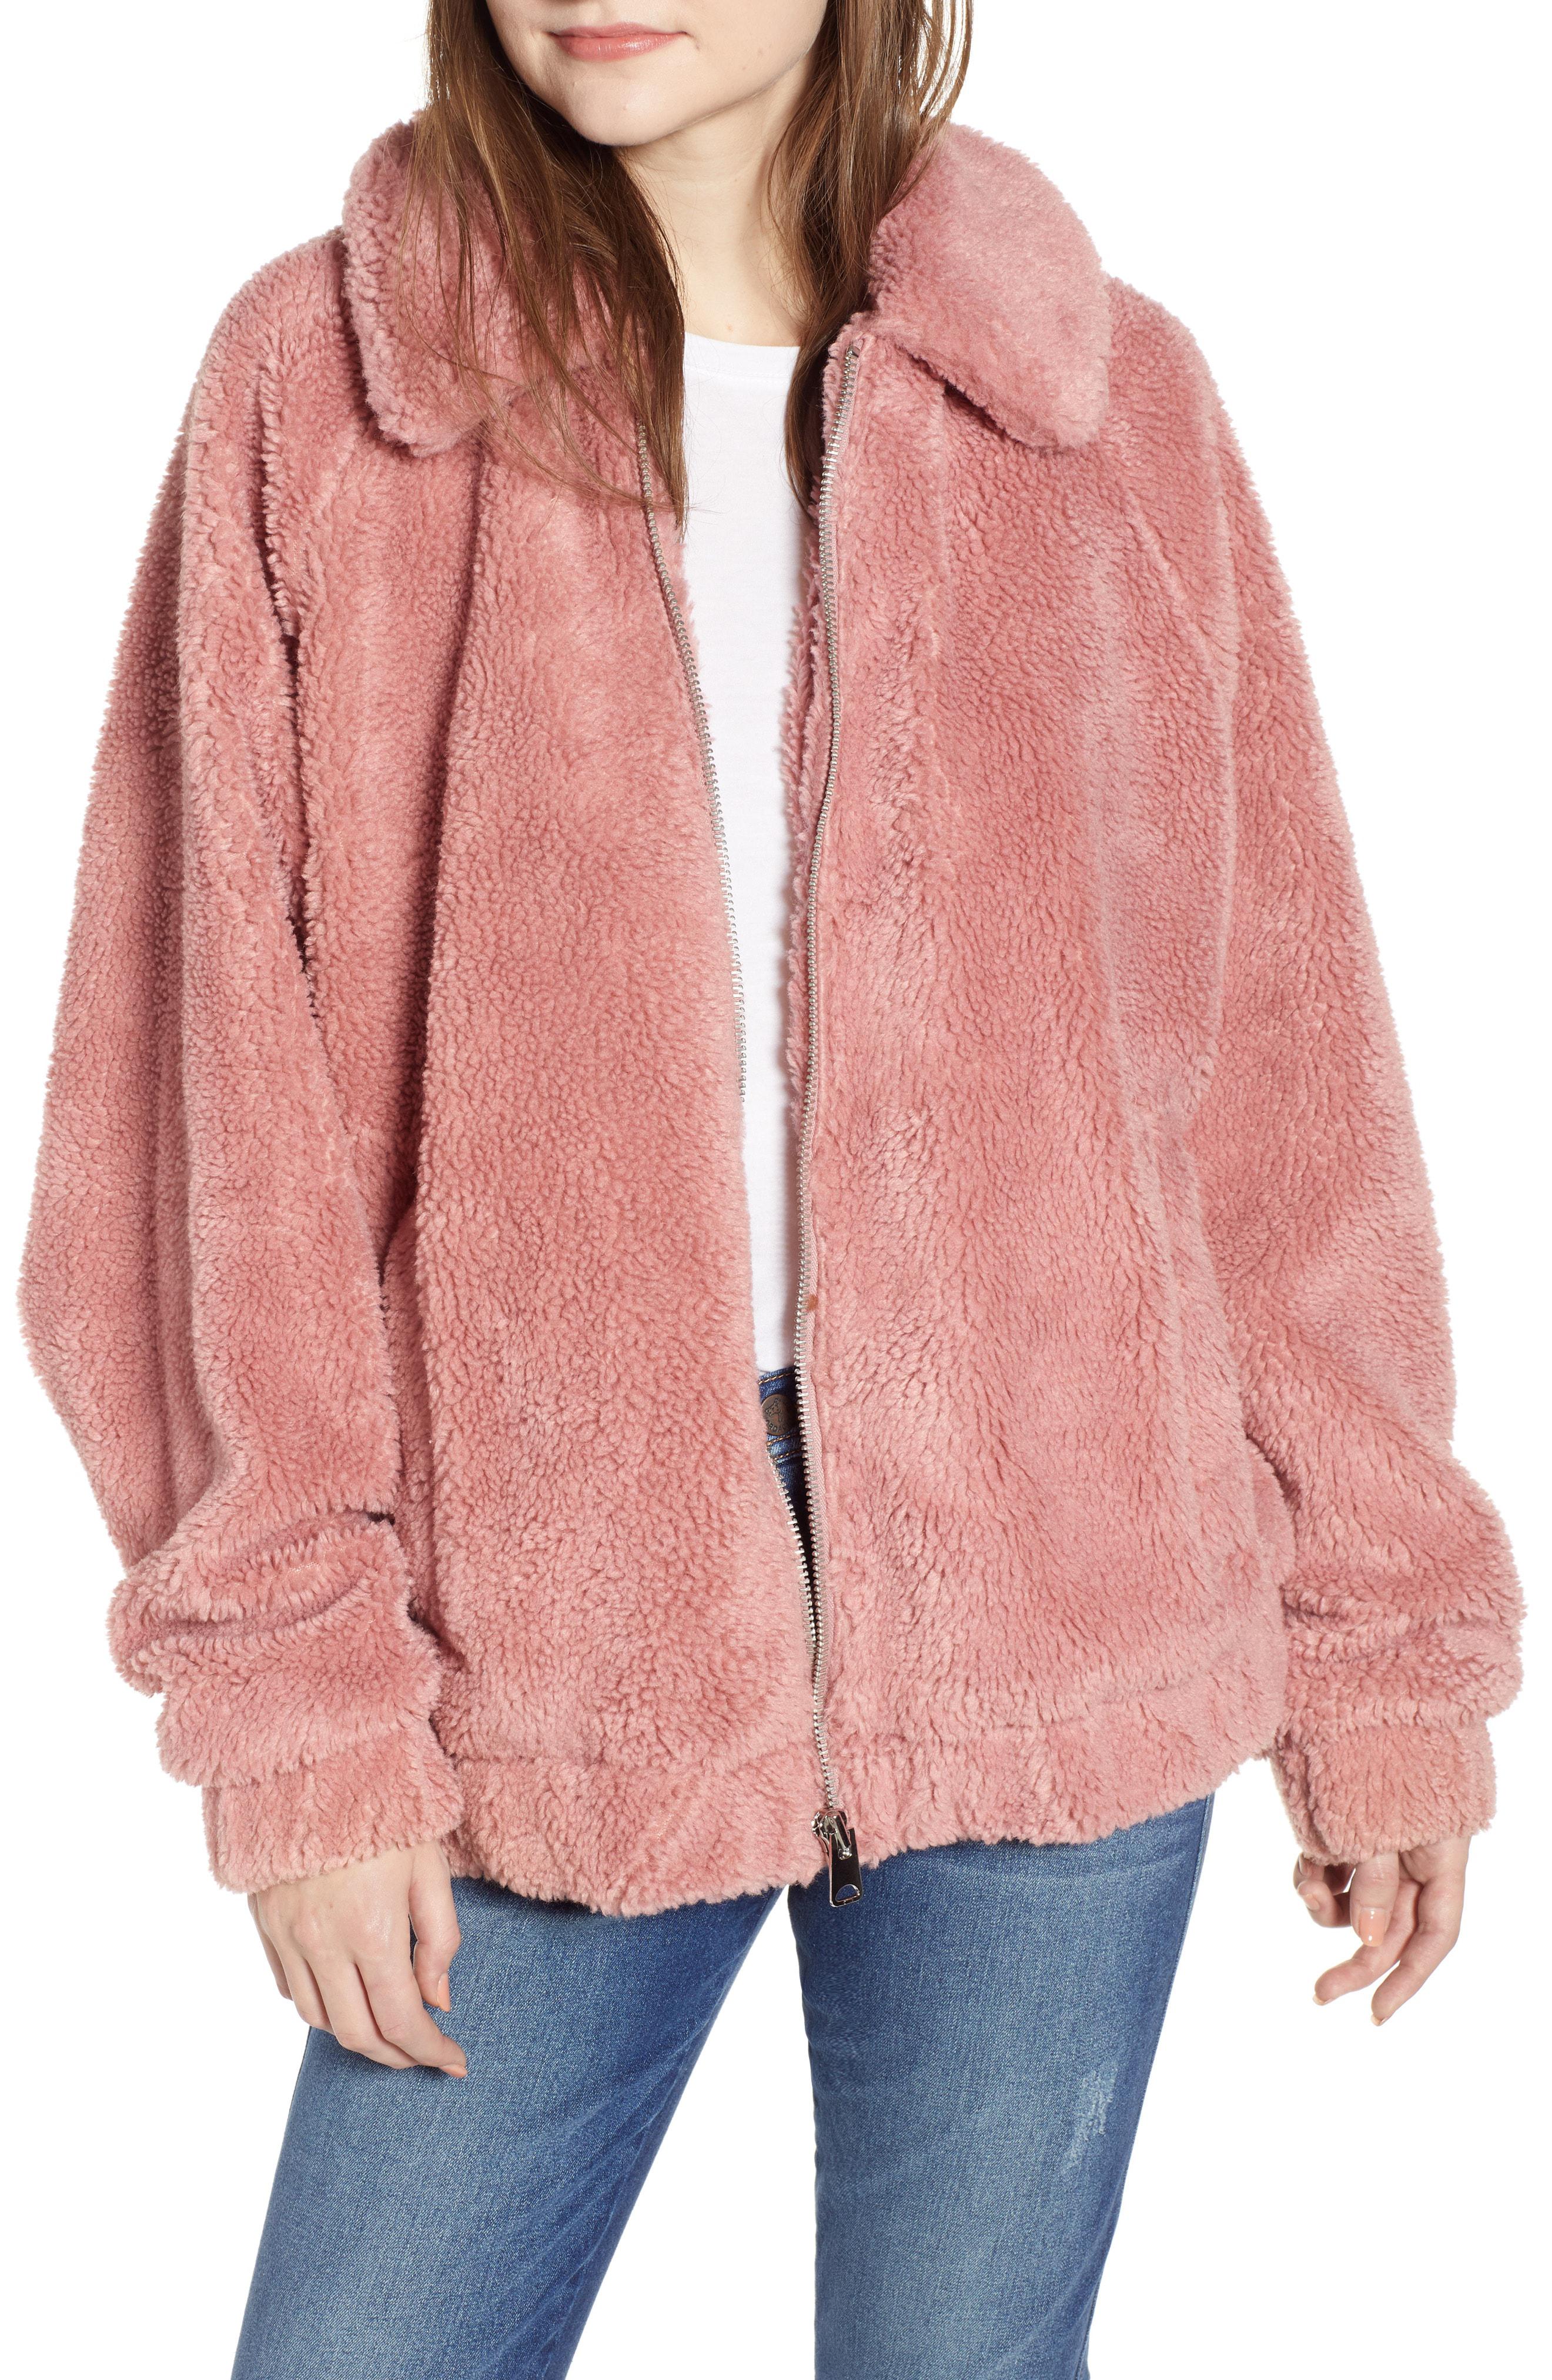 urban outfitters teddy jacket